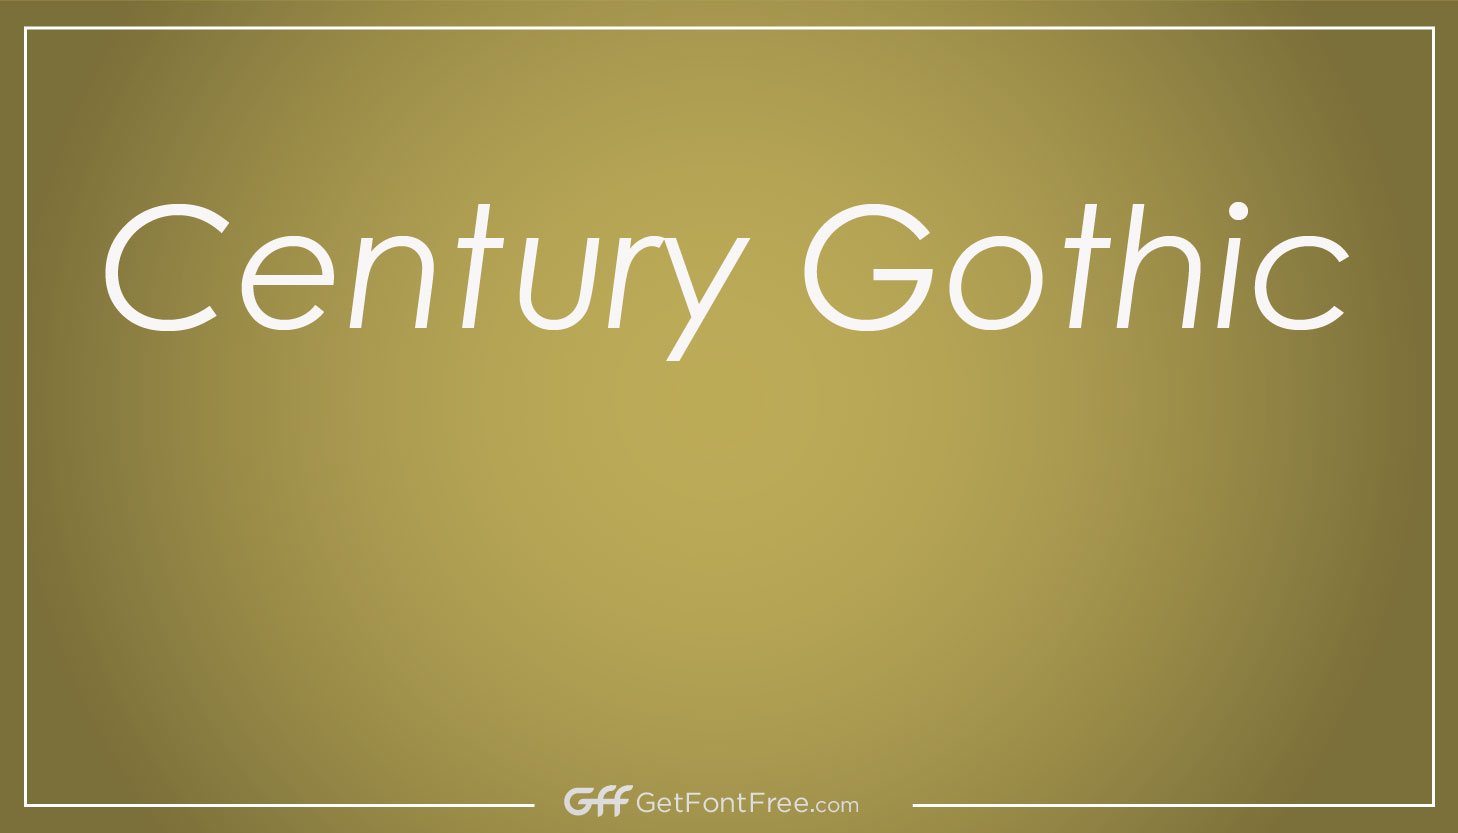 Century Gothic Font is a geometric sans-serif typeface that was created by American-type designer Morris Fuller Benton in 1930. It was initially developed as a replacement for the less versatile and less legible typeface, Futura. The design of Century Gothic was heavily influenced by the Art Deco style of the 1920s and 1930s, which is reflected in its sleek and modern appearance.